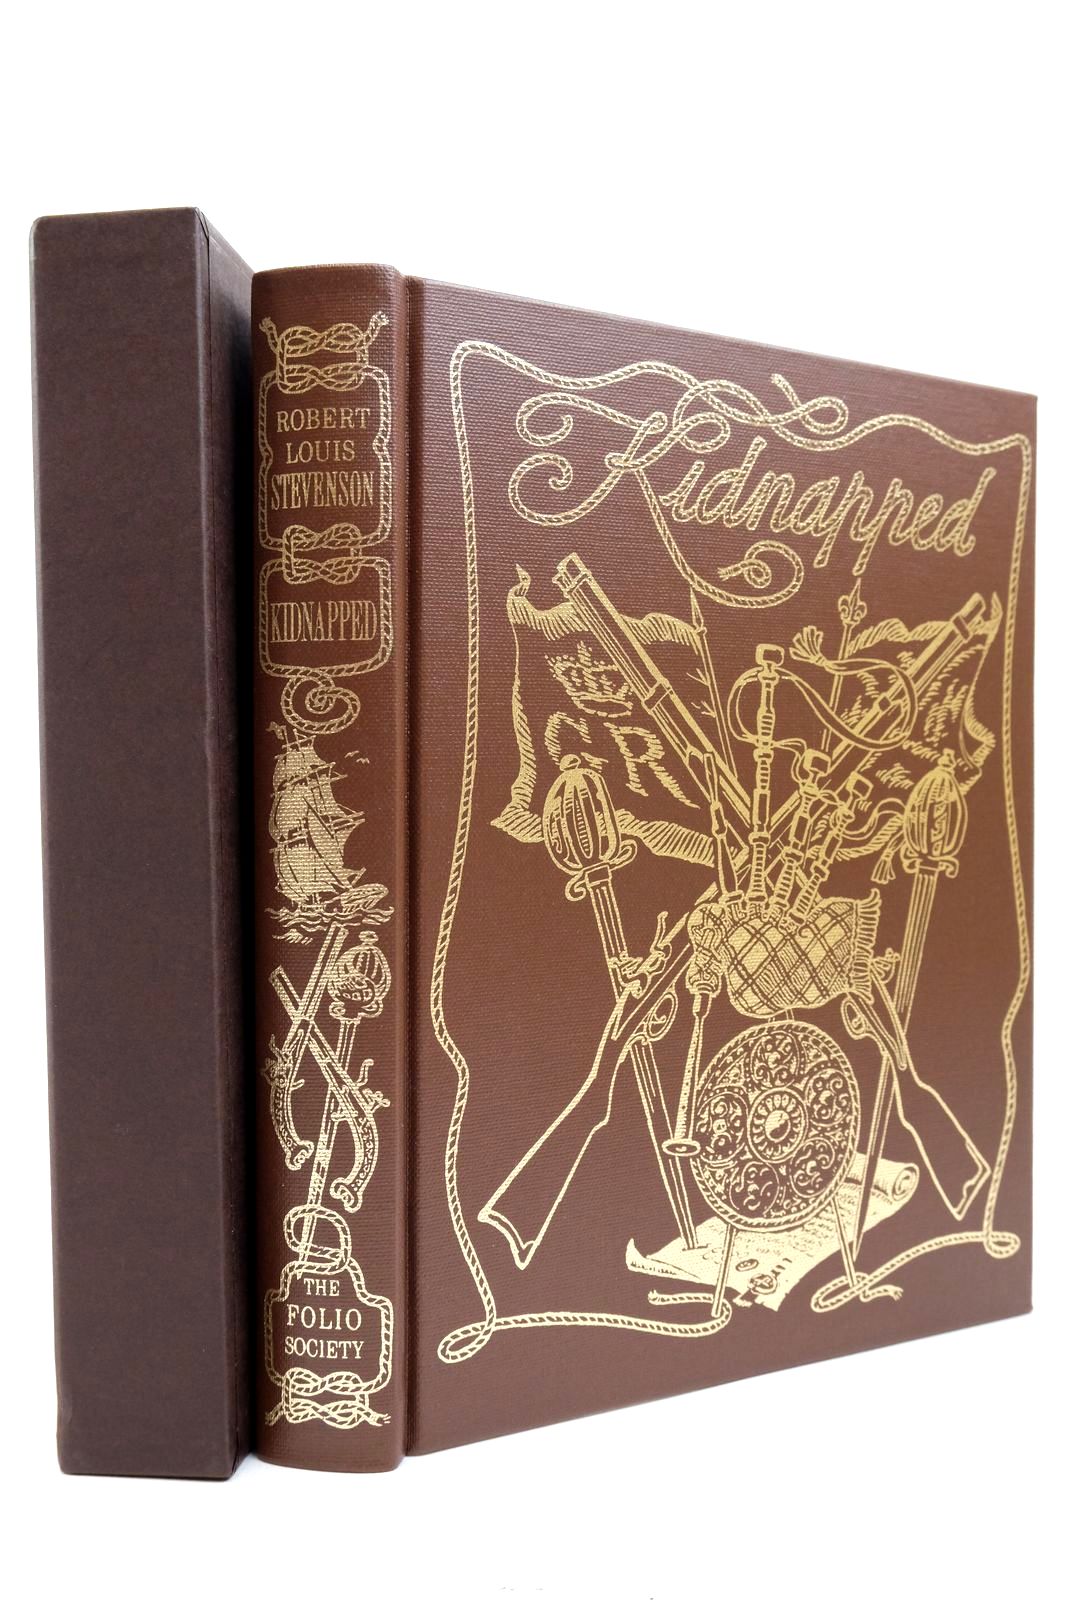 Photo of KIDNAPPED written by Stevenson, Robert Louis illustrated by Bannister, Philip published by Folio Society (STOCK CODE: 2140920)  for sale by Stella & Rose's Books